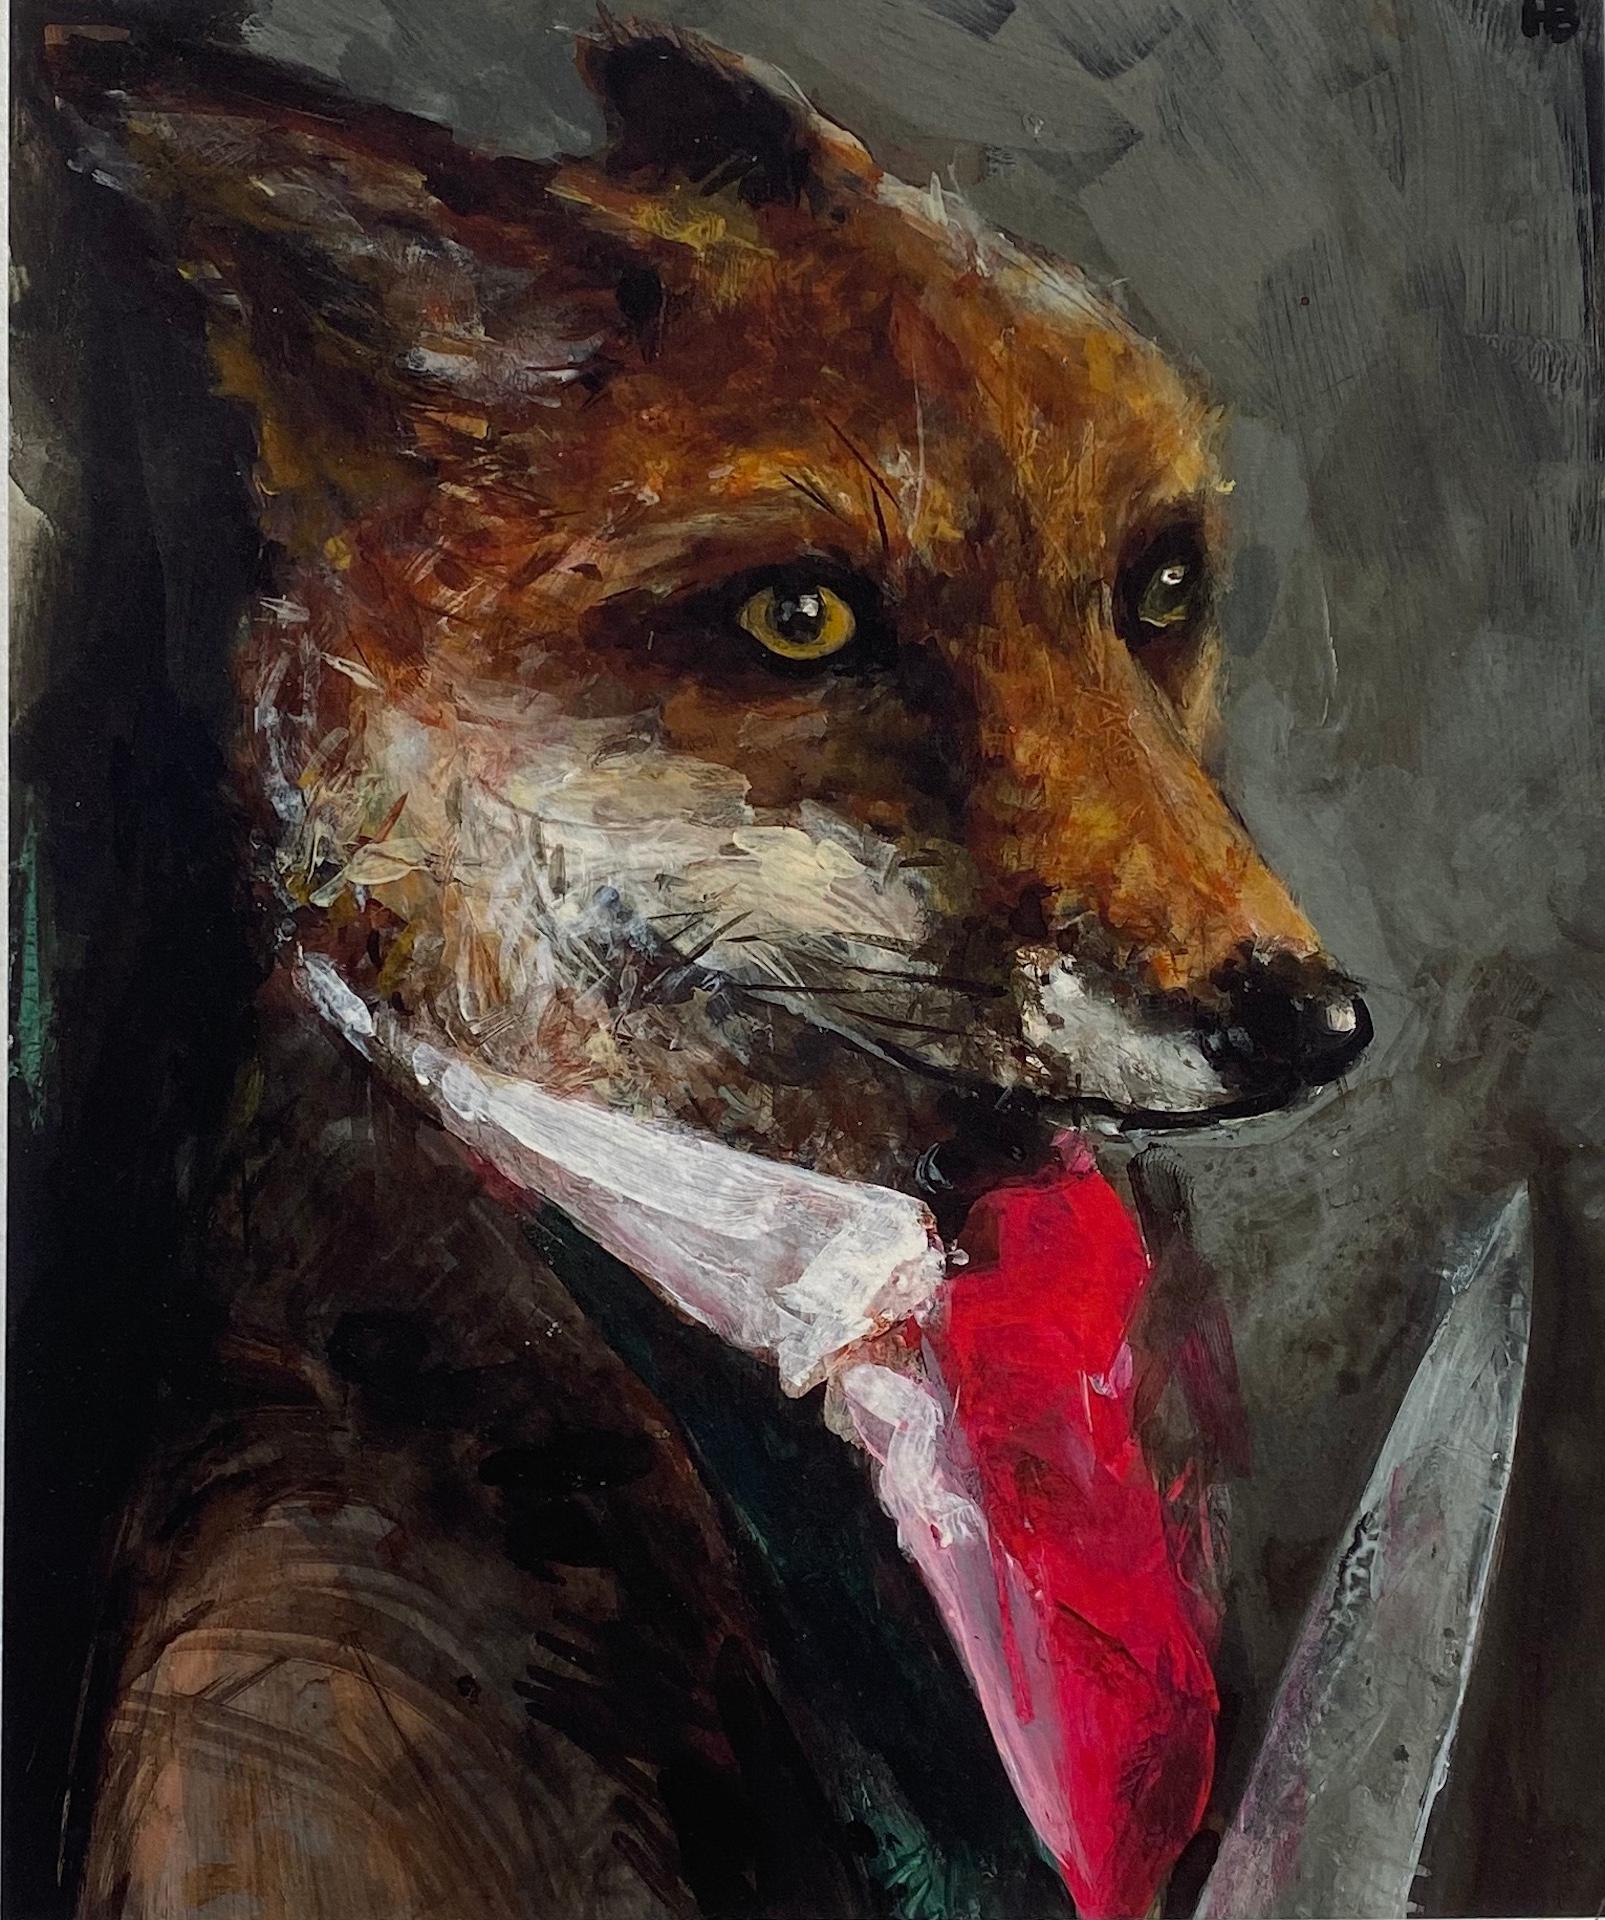 'Matty Groves' by Harry Bunce is a limited edition print. This print features a fox dressed in a suit and shirt with a bright pink tie, he is holding a knife and is looking off into the distance.
Harry Bunce was born and raised in a small Hampshire